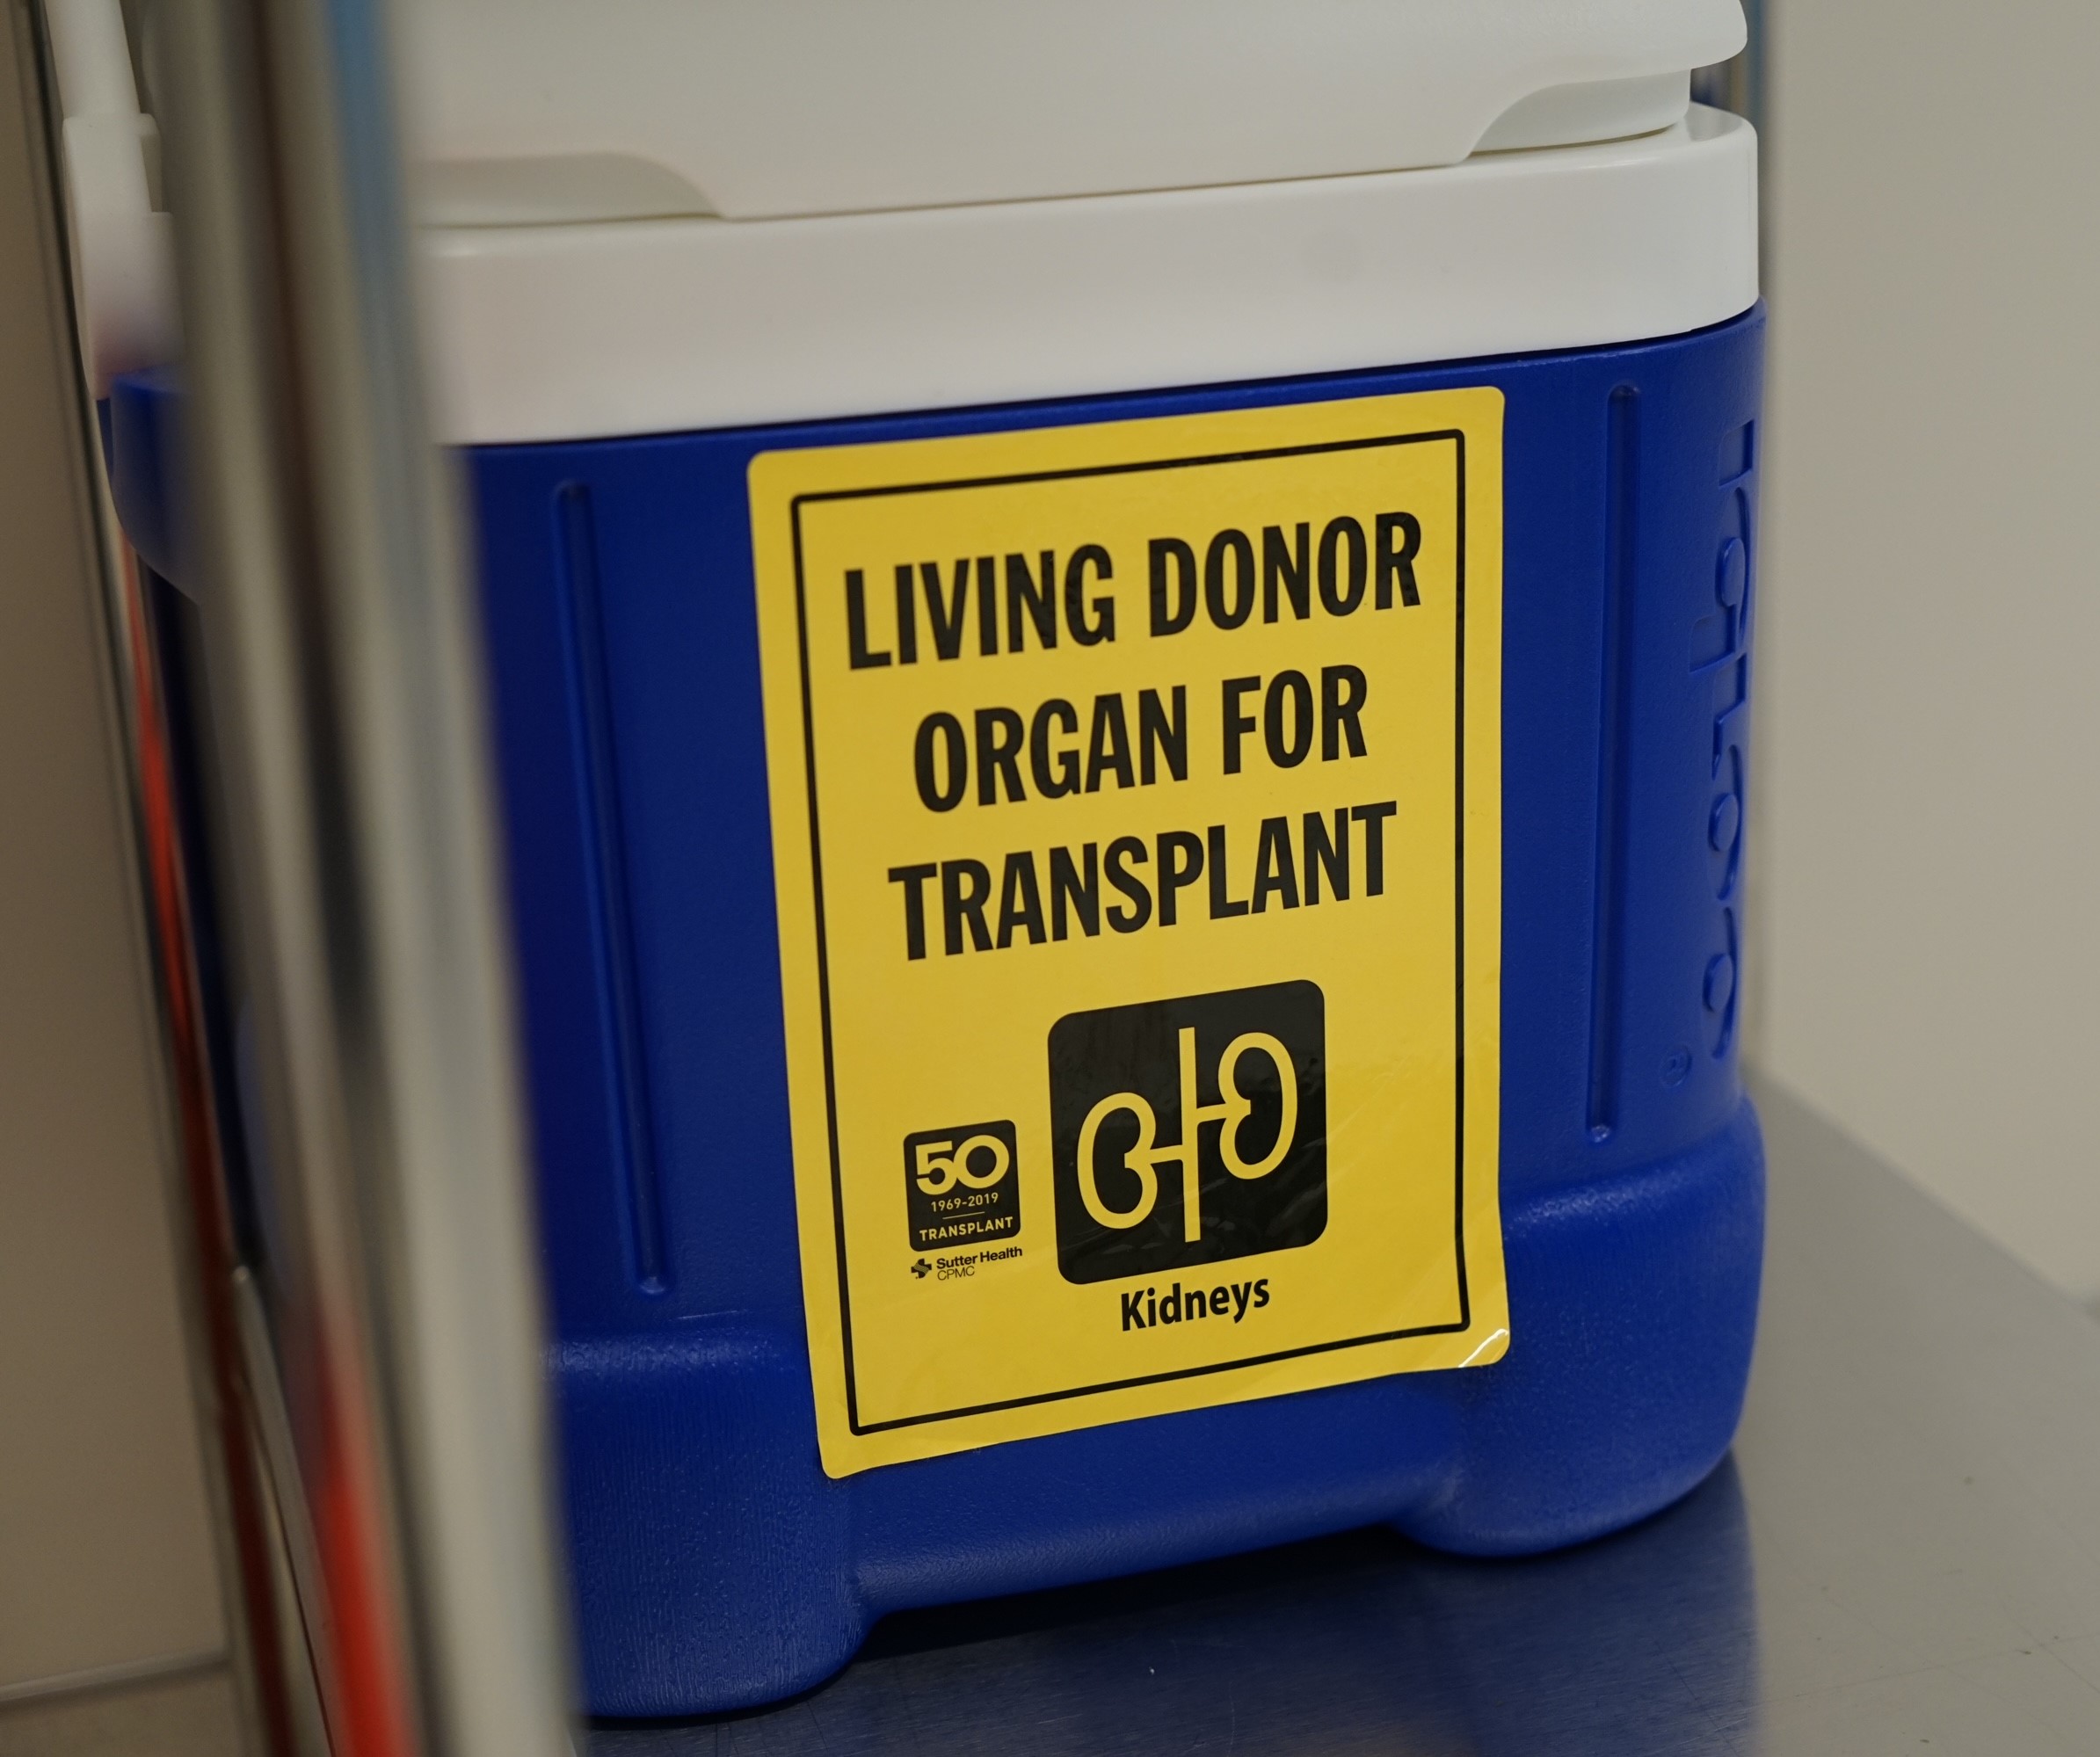 A living donor organ cooler at Sutter's CPMC